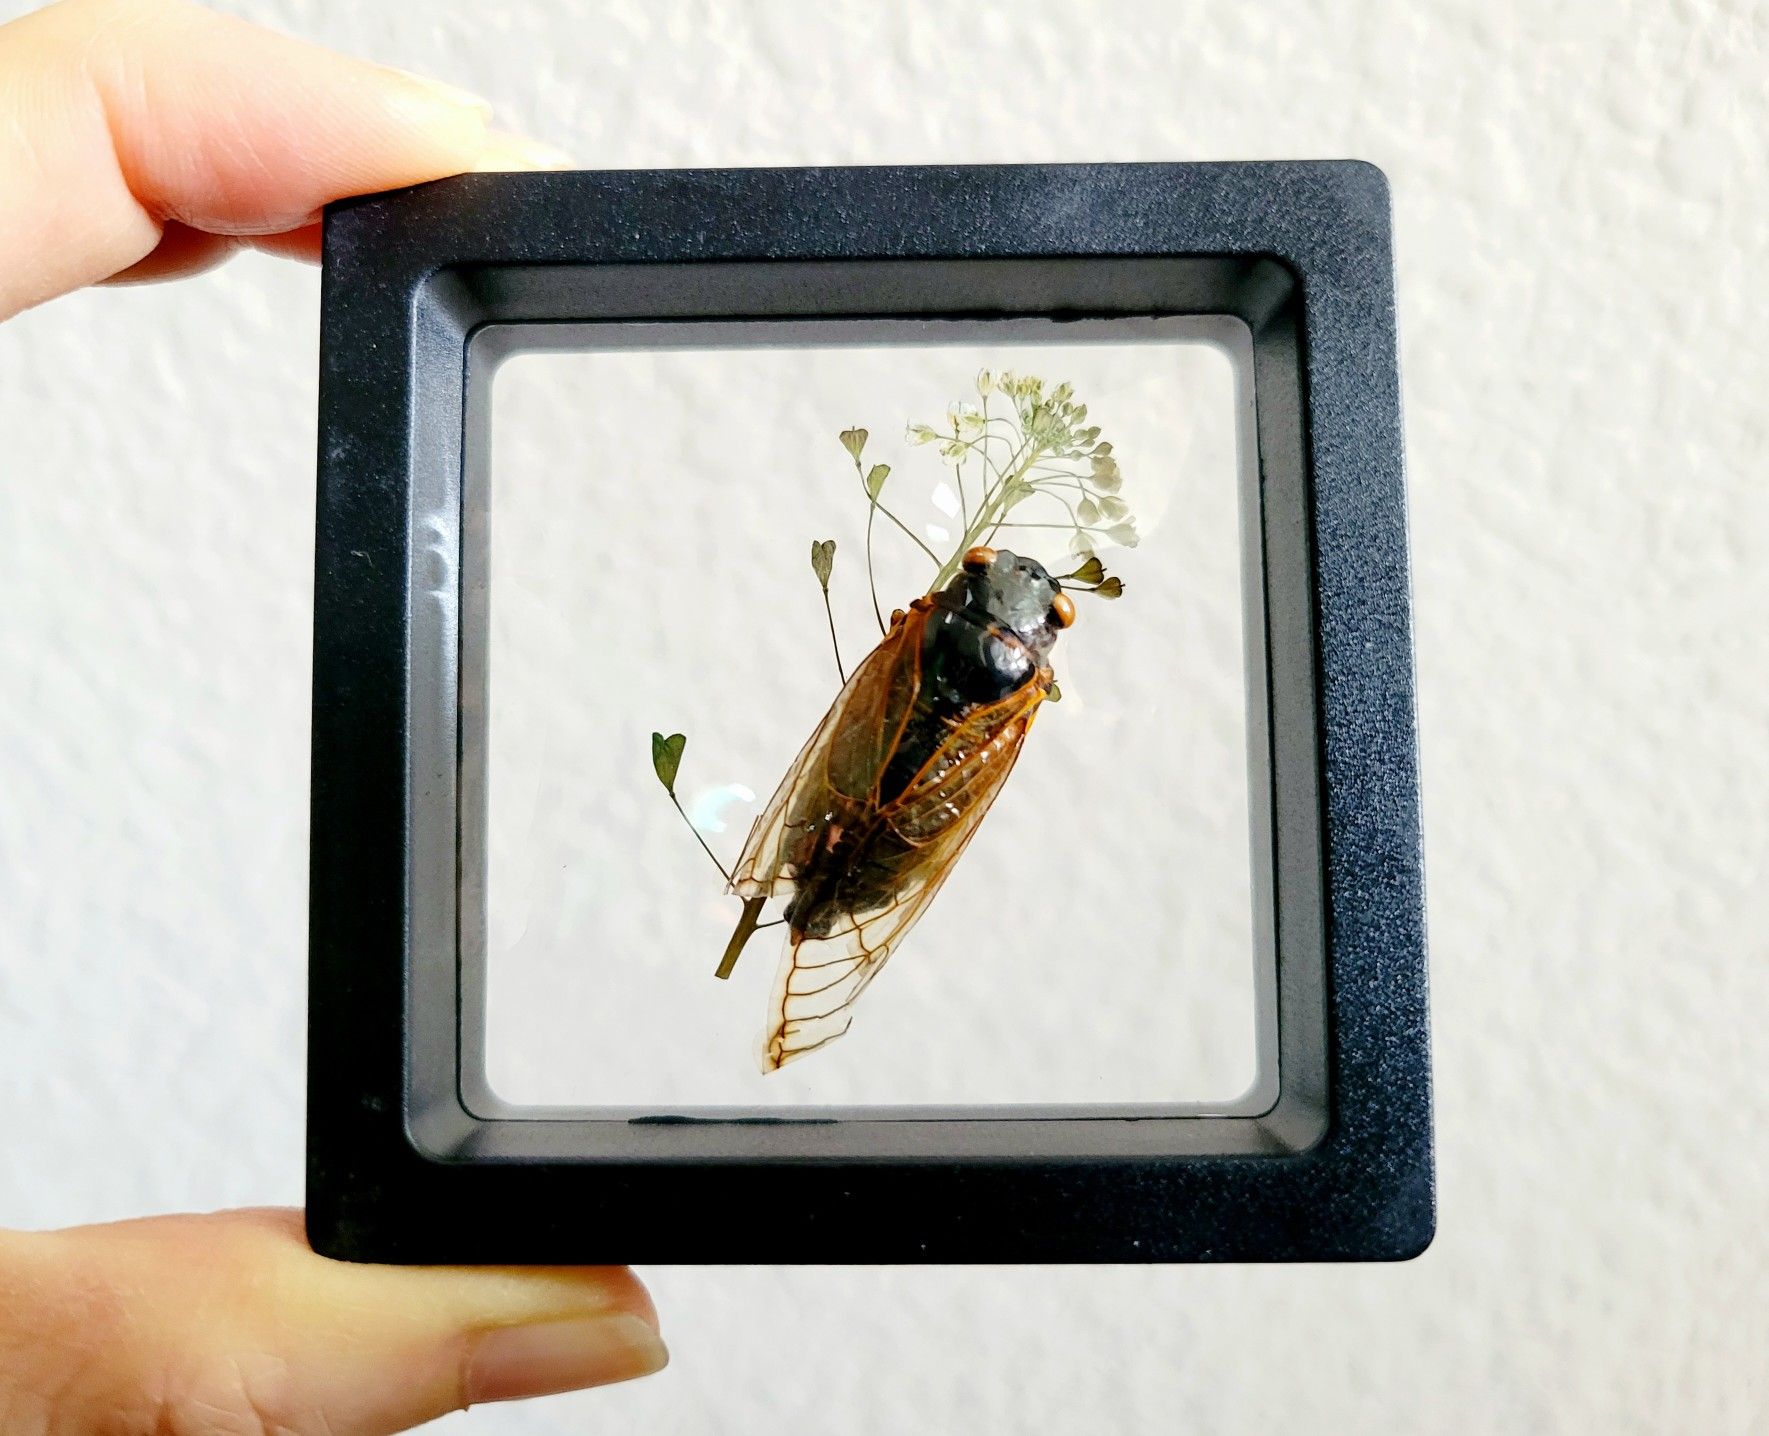 brood x cicada decor with dried leaves, art by Sherrie Thai of Shaireproductions.com